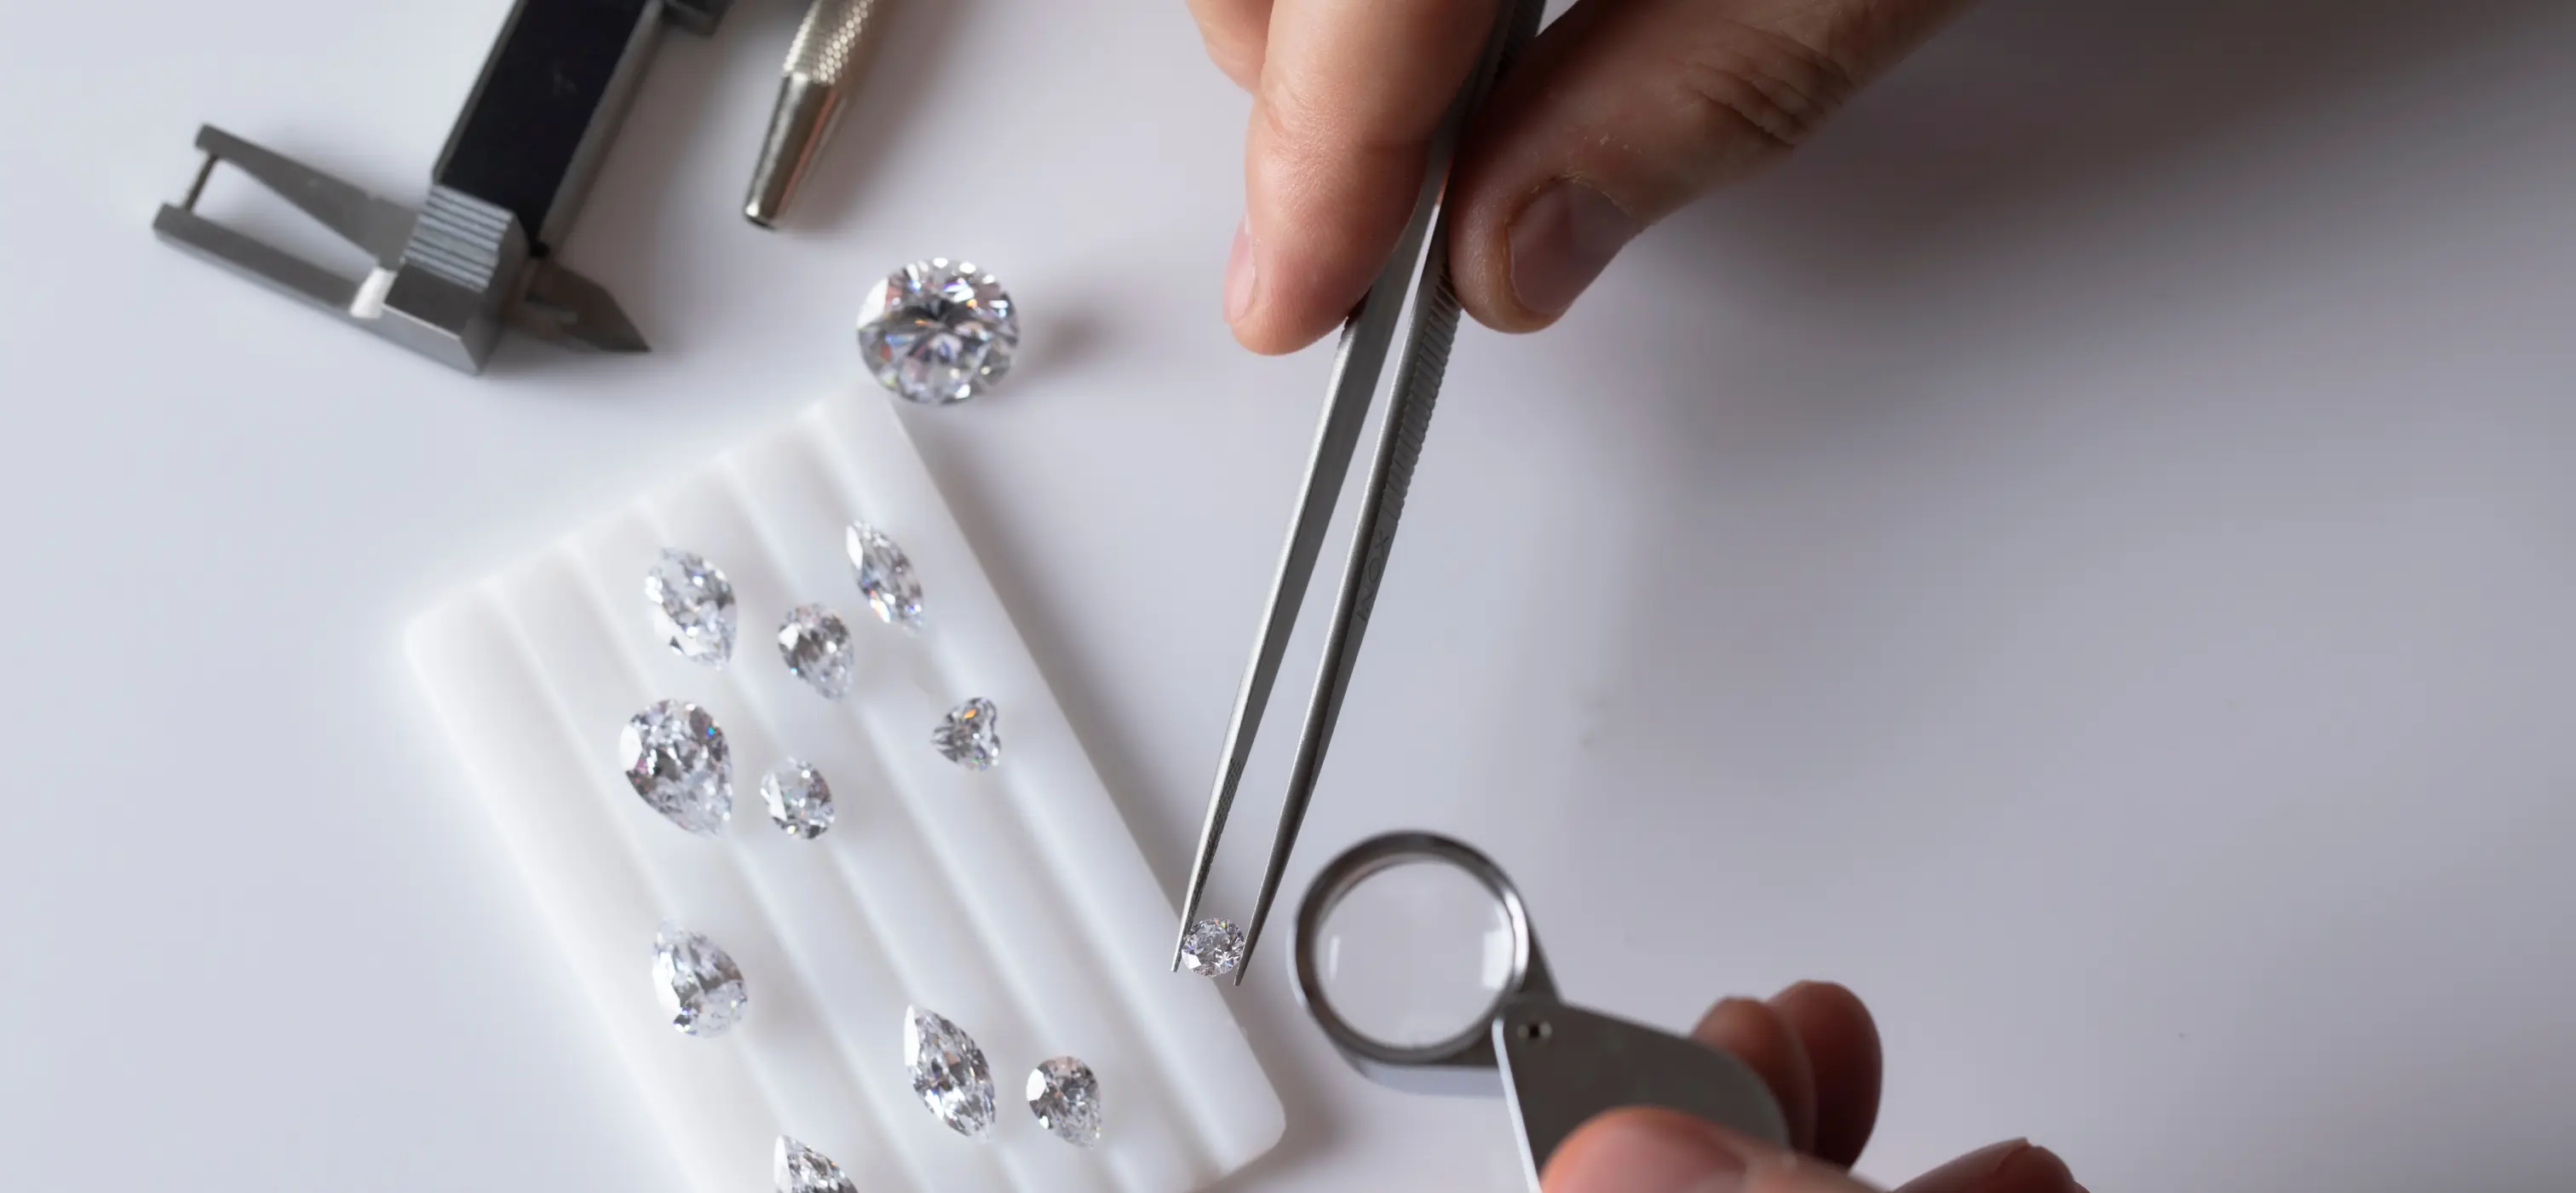  
 
 
 
 &nbsp; 
 
 &nbsp; 
 &nbsp; 
     
 &nbsp; 
 &nbsp; 
 &nbsp; 
 &nbsp; 
  Diamond  Buying Guide  
 &nbsp; 
  Navigate your diamond buying  experience with confidence.  
 &nbsp; 
 Shop All Diamonds 
 &nbsp; 
 &nbsp; 
 &nbsp; 
 &nbsp; 
 &nbsp; 
 &nbsp; 
 
 
 
 
 
 
 &nbsp; 
  Diamond Buying  Guide  
  Navigate your diamond buying experience  with confidence.  
 &nbsp; 
 Shop All Diamonds 
 &nbsp; 
 &nbsp; 
 